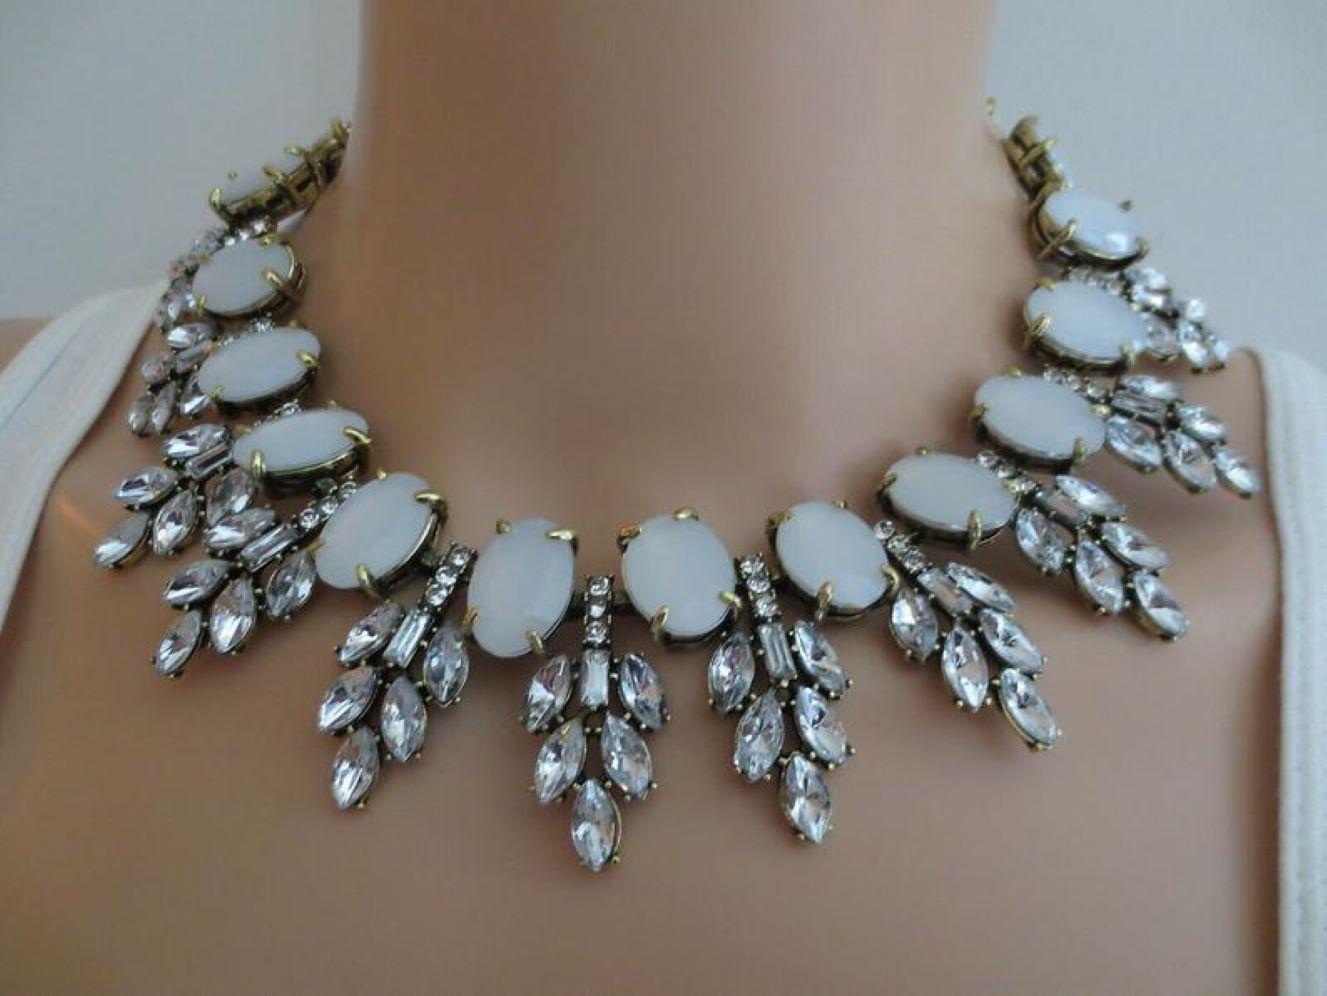 Beautiful vintage Designer Signed Oscar de la Renta Haute Couture Runway Necklace and Clip Earrings. Hand set Sparkling Ice Crystals and Opaque stones. Necklace measures approximately 18